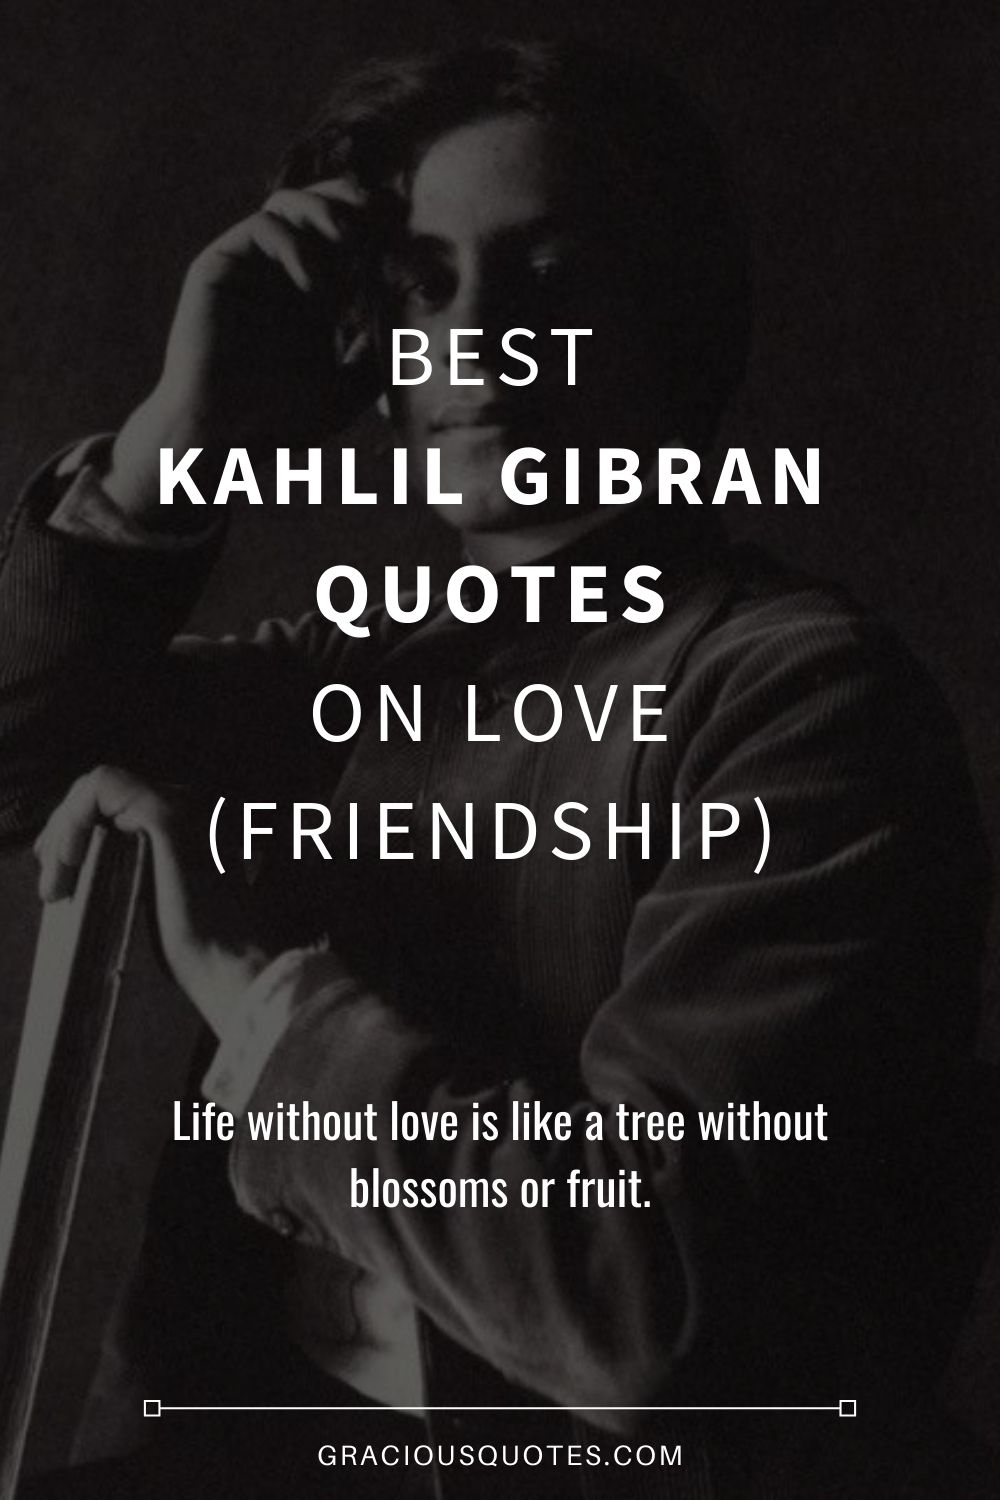 Best Kahlil Gibran Quotes on Love (FRIENDSHIP) - Gracious Quotes